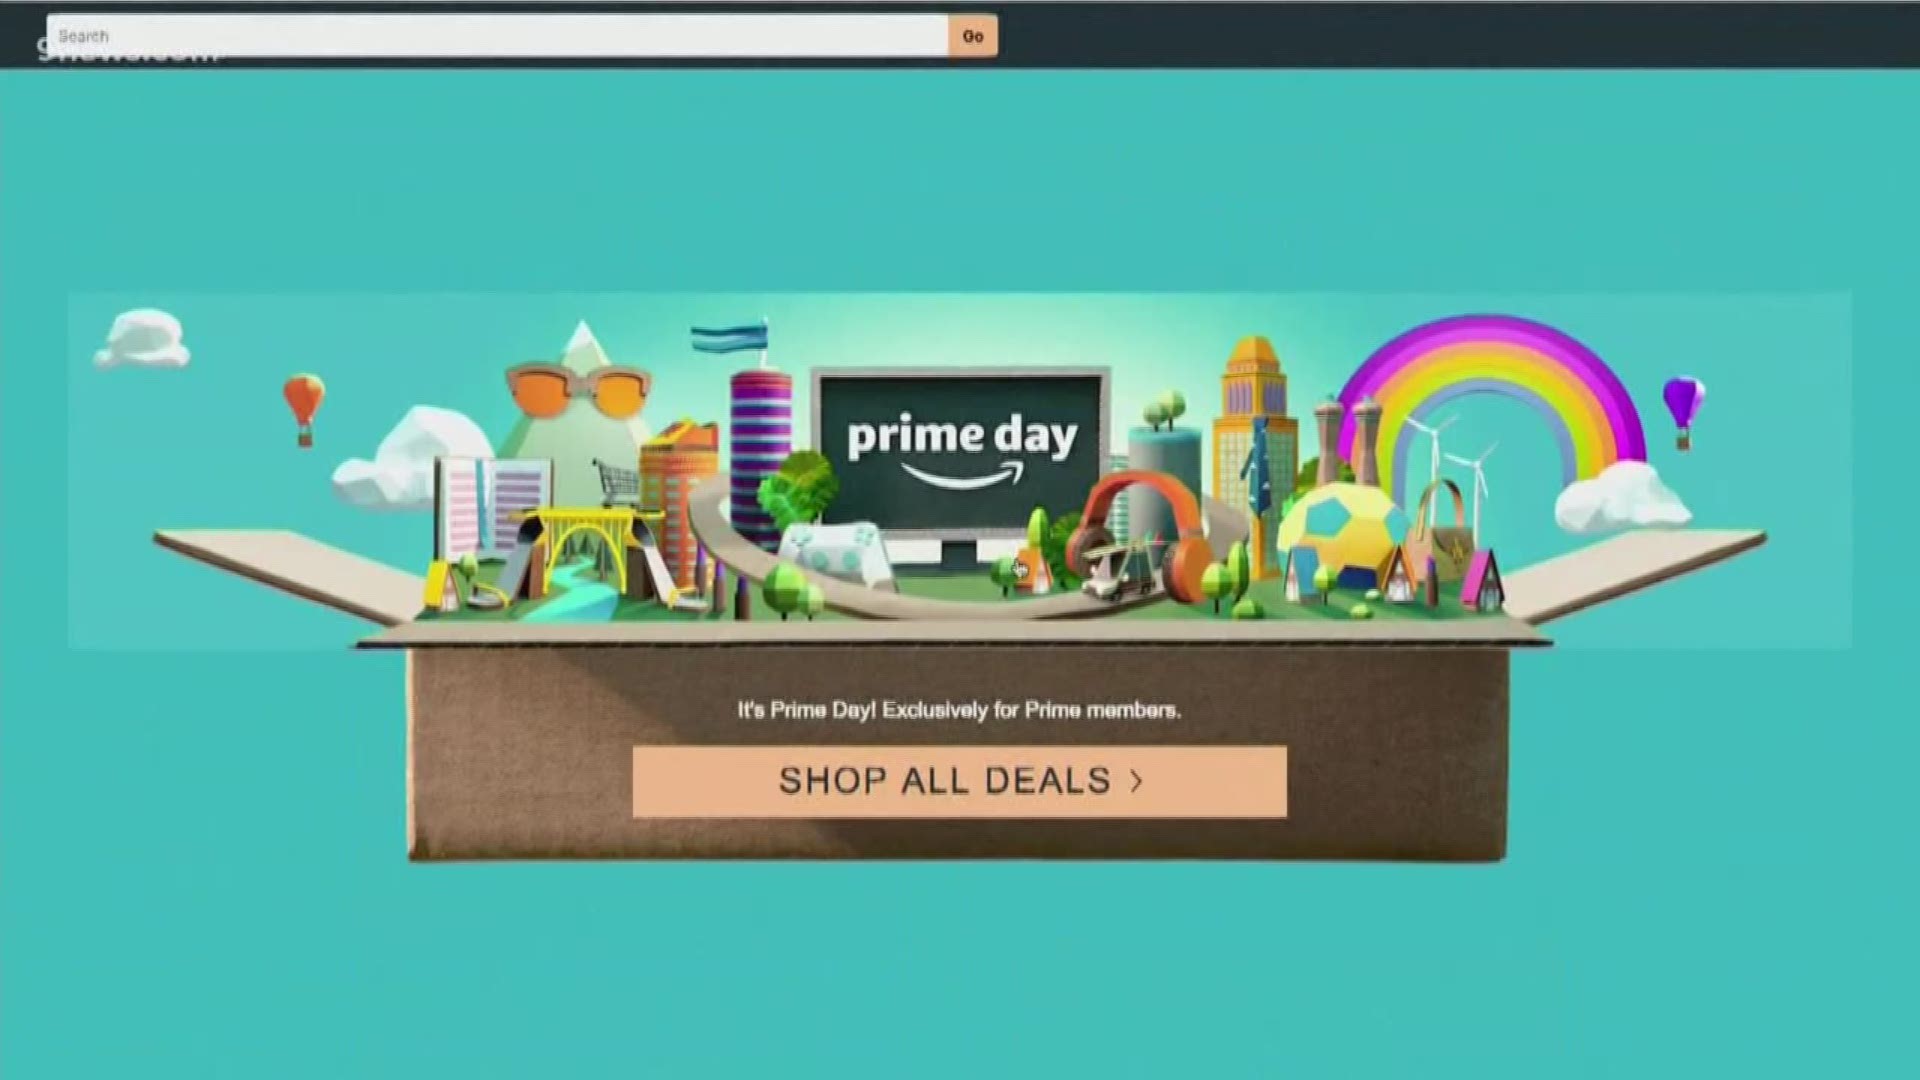 Amazon will have its Prime Day and other retailers will offer deep discounts. Webroot offers some tips to keep your data safe while saving.